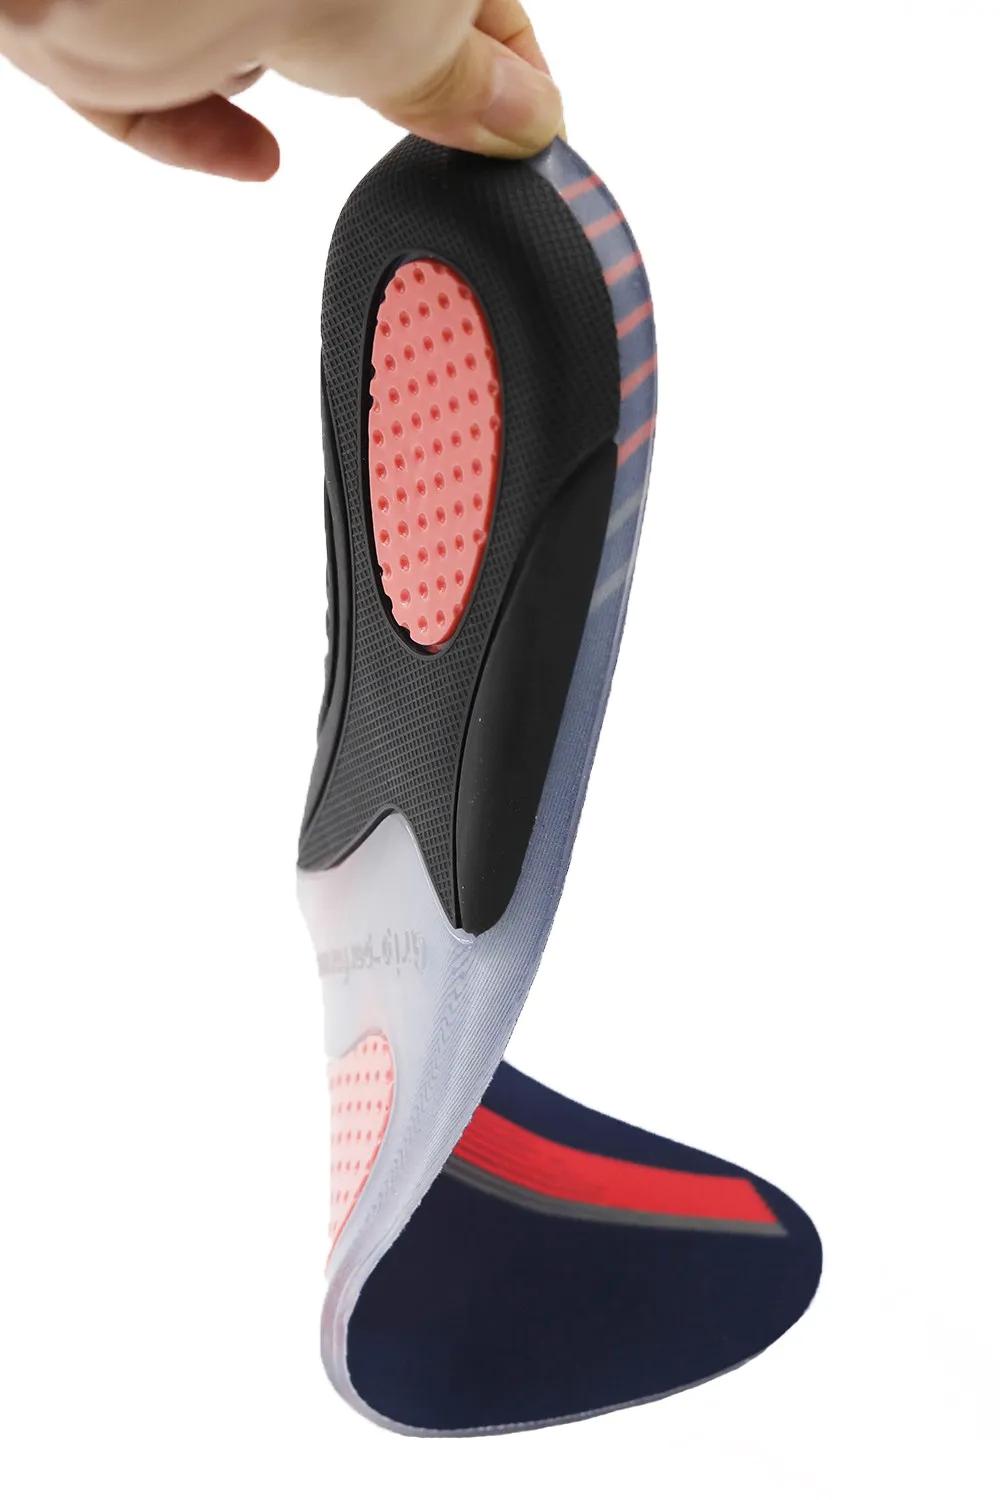 S-King gel insoles factory for forefoot pad